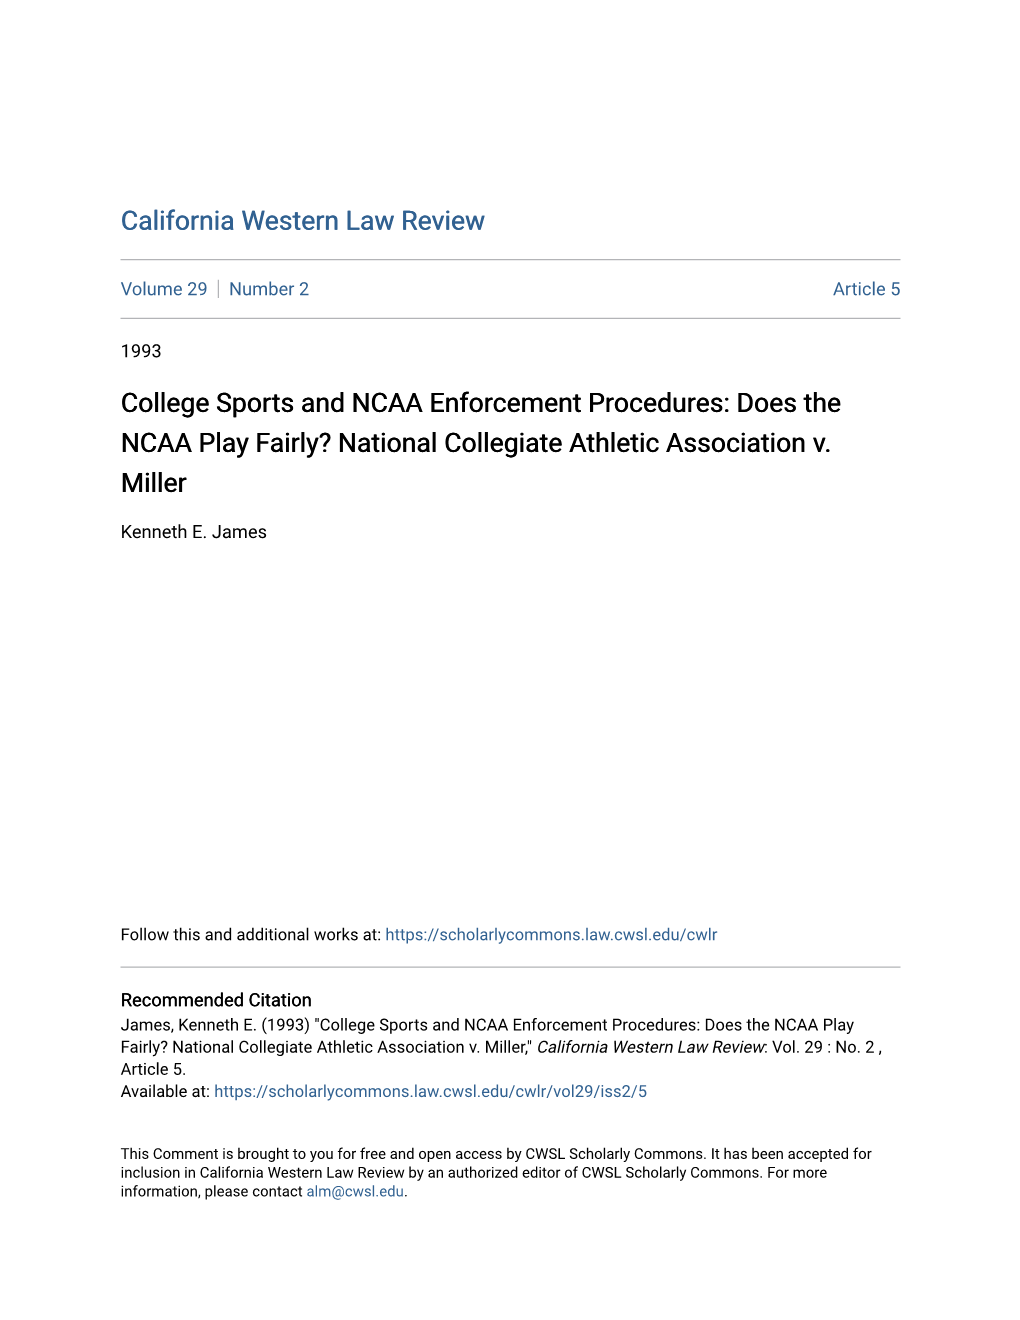 College Sports and NCAA Enforcement Procedures: Does the NCAA Play Fairly? National Collegiate Athletic Association V